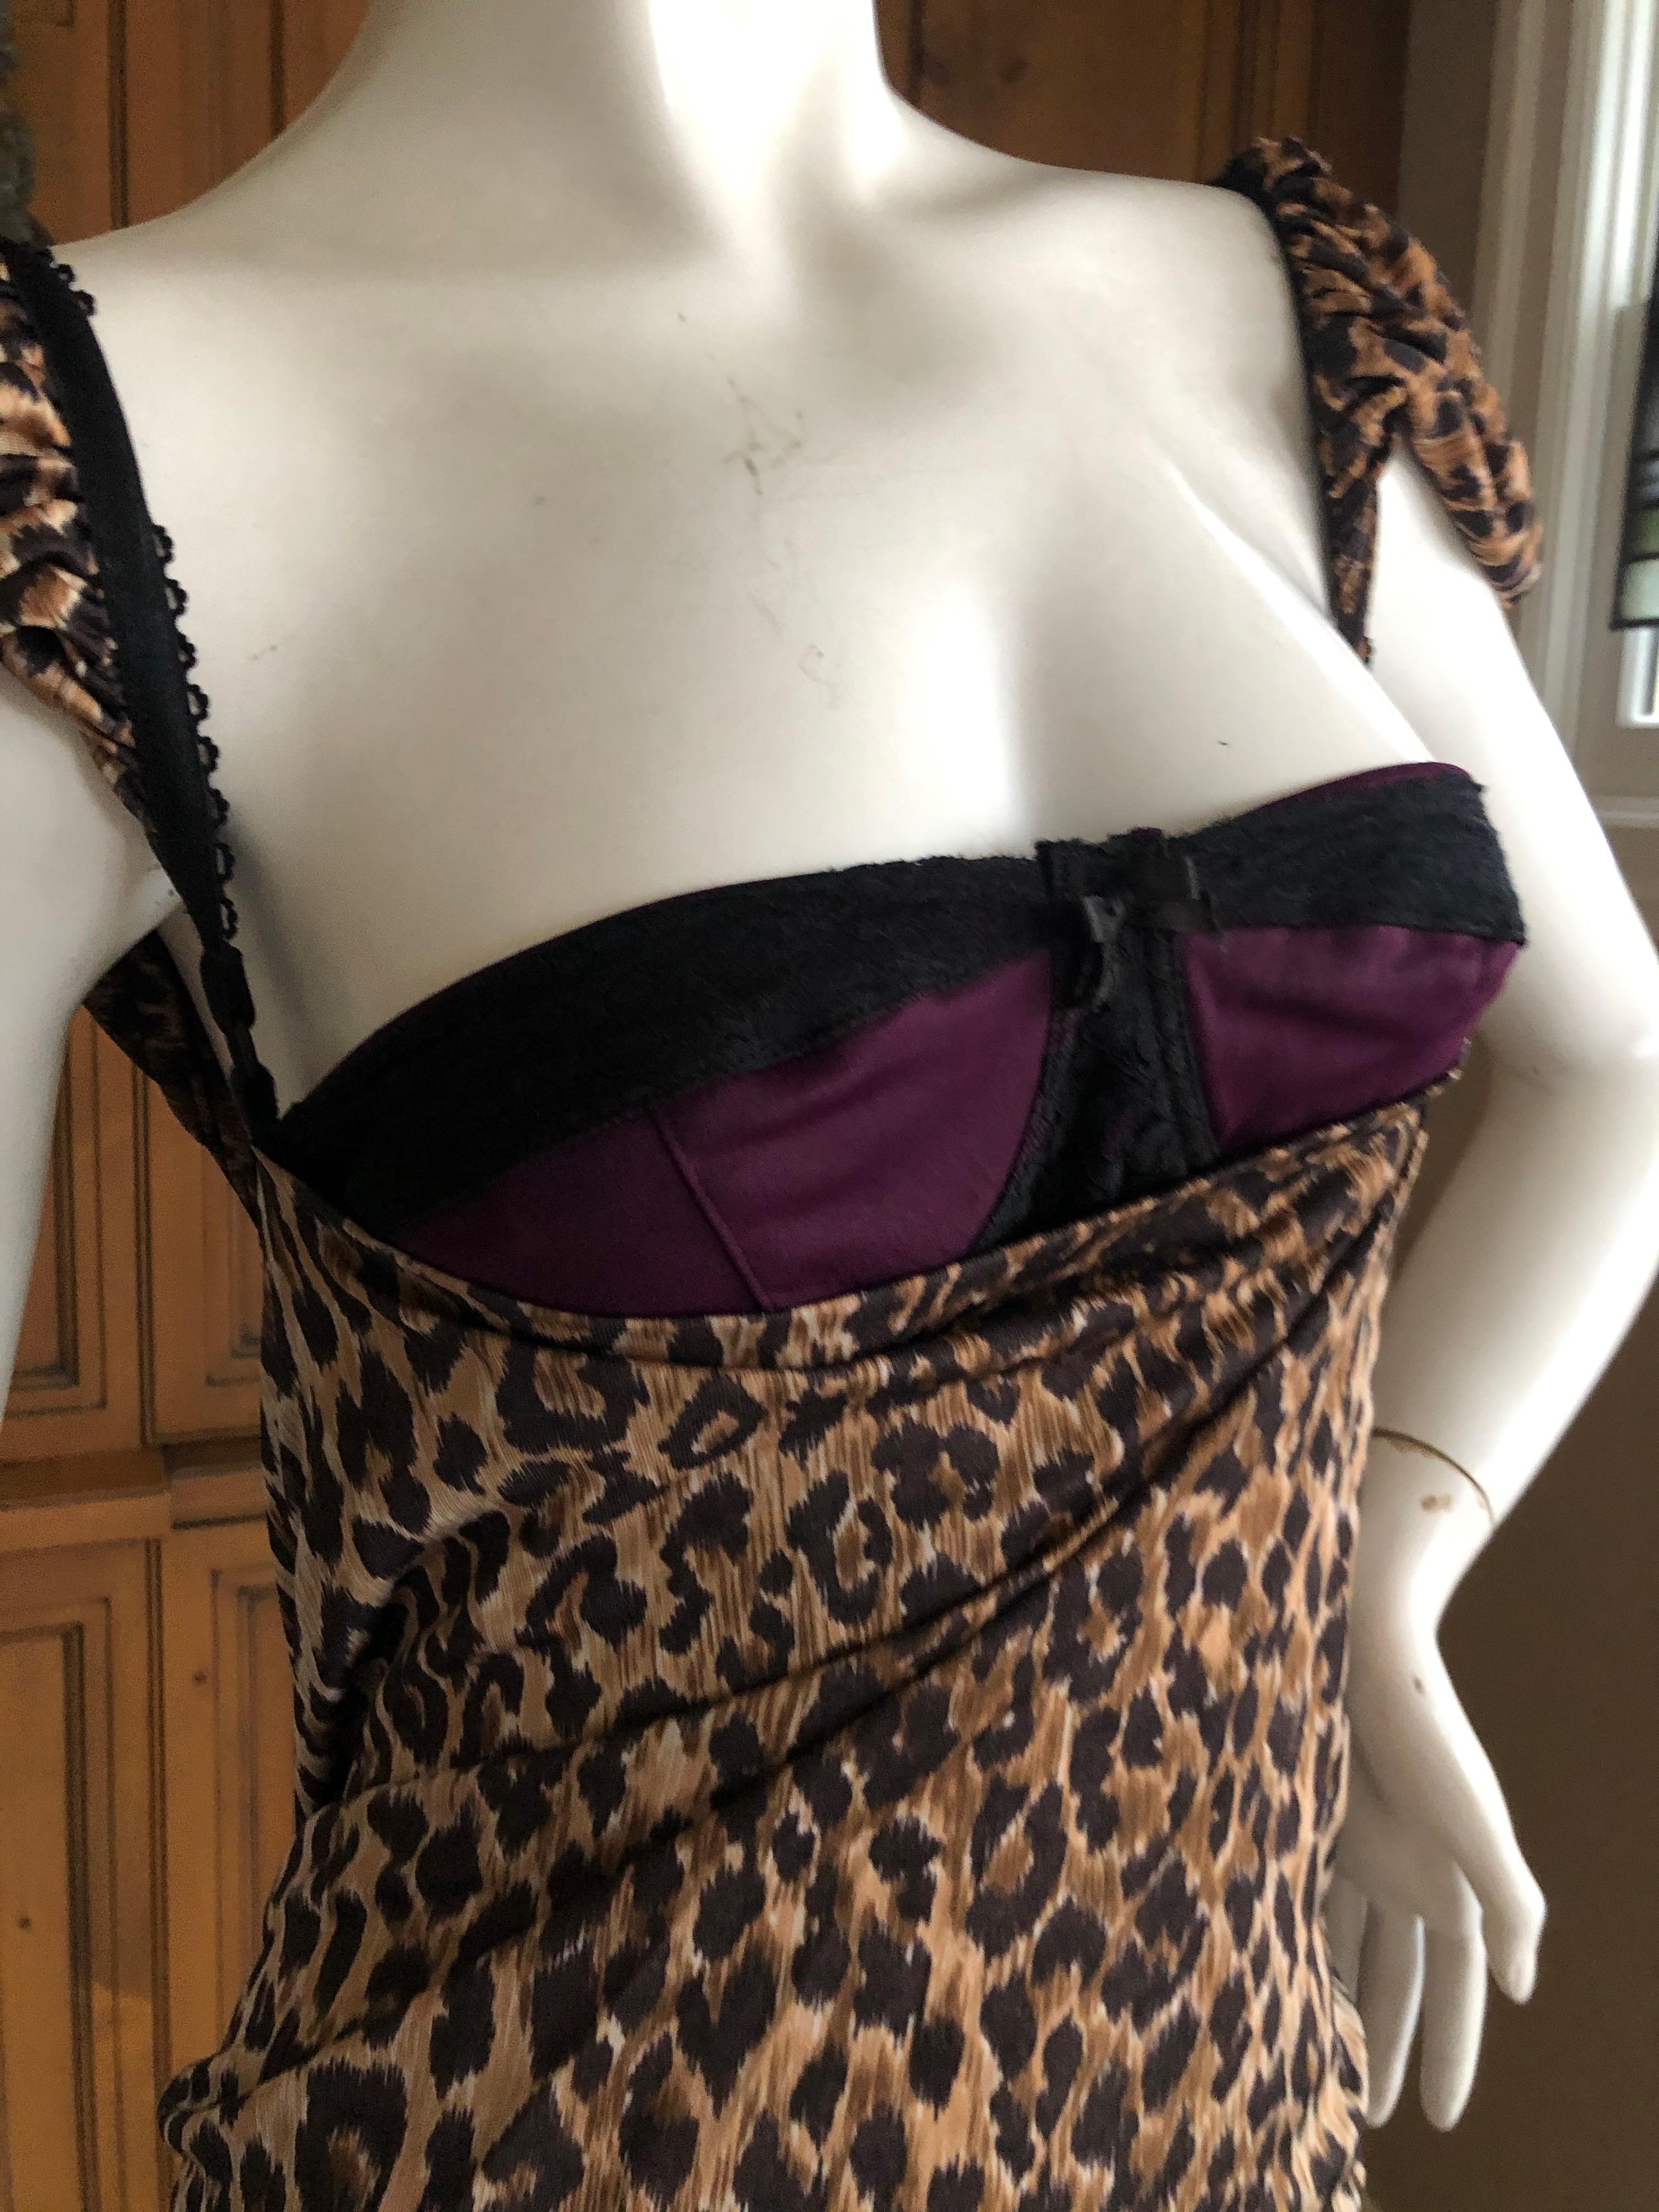 Dolce & Gabbana for D&G Vintage Leopard Print Cocktail Dress with Attached Bra In Good Condition For Sale In Cloverdale, CA